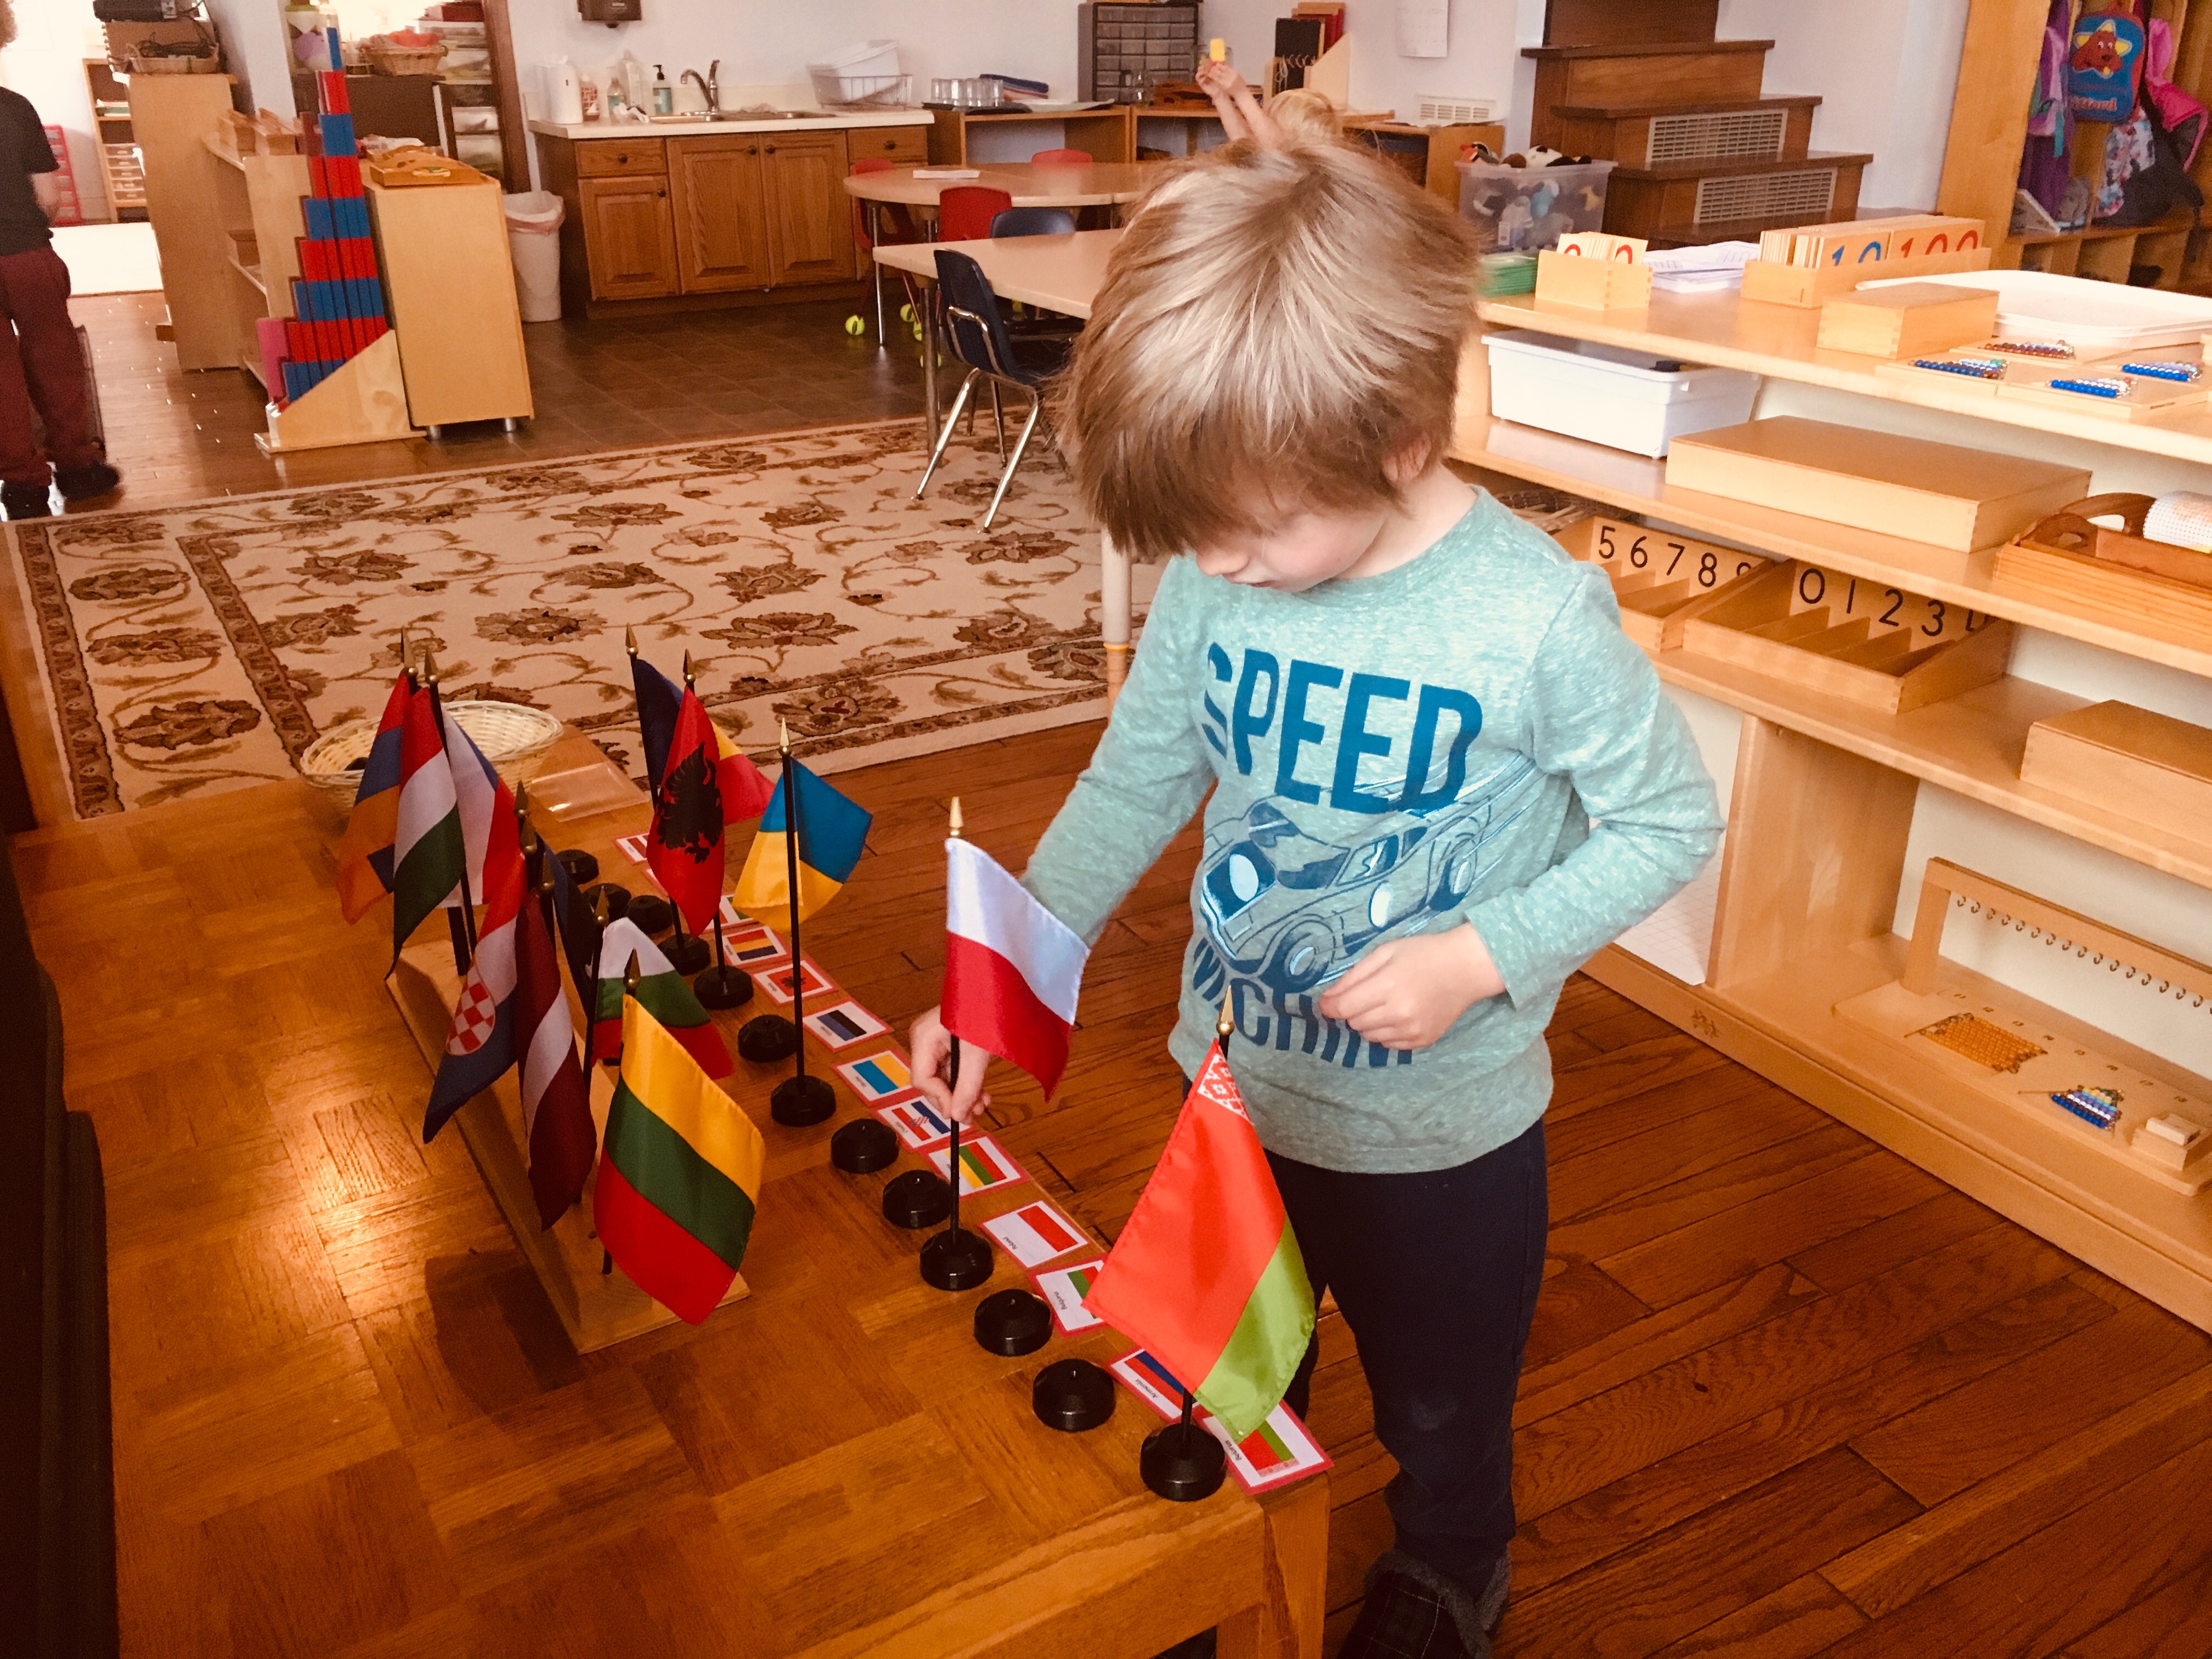 Wesley, age 4, matches flags with images of the flags on cards.